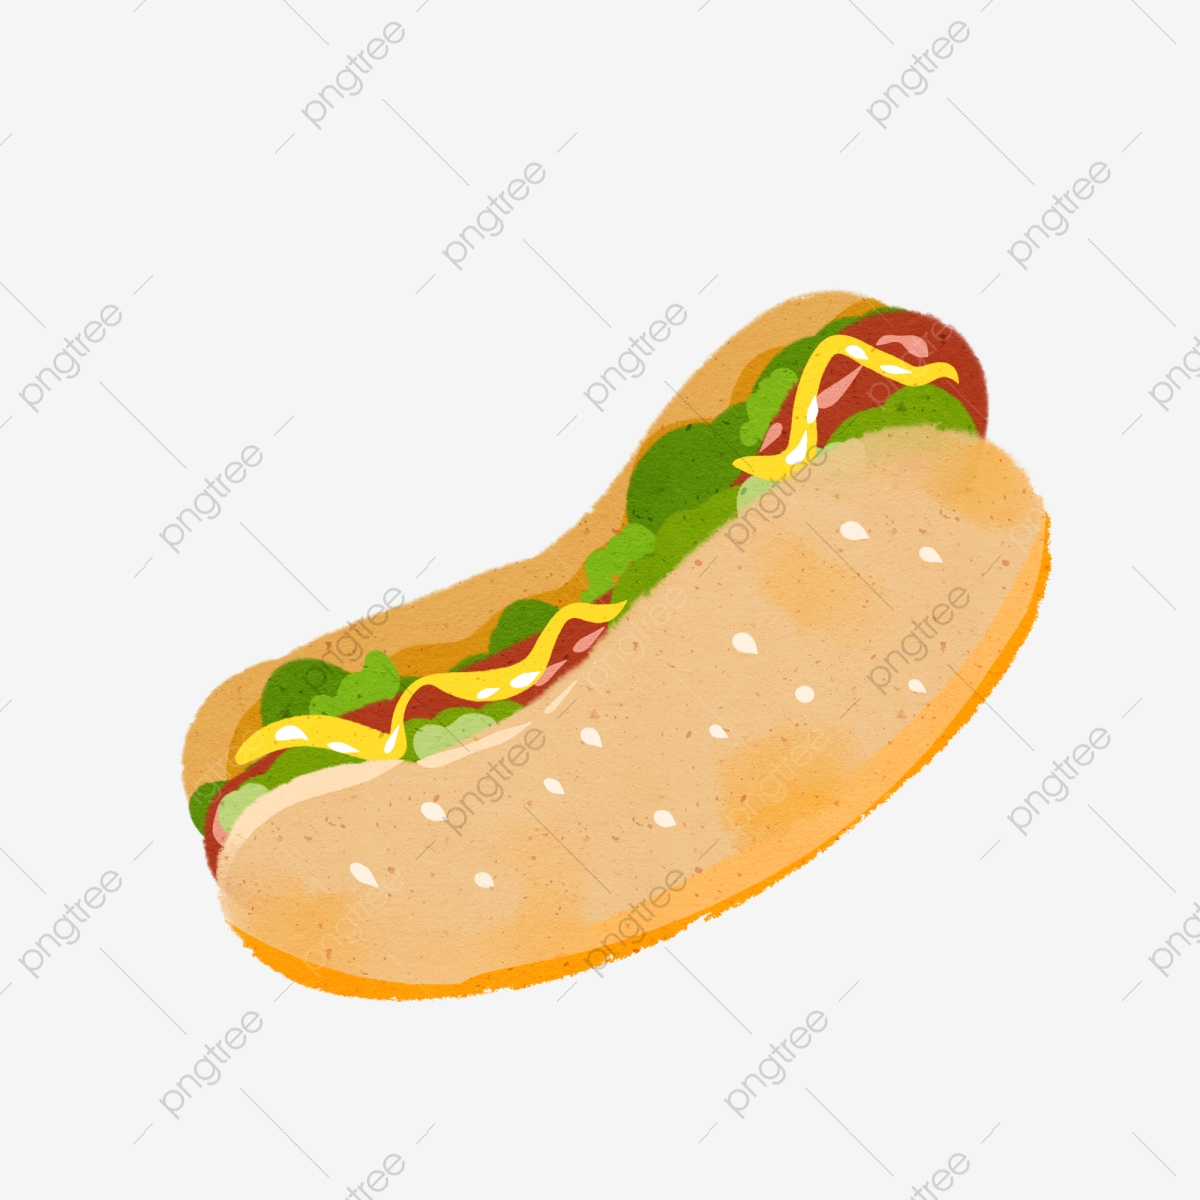 Lettuce clipart american. Delicious sandwiches fast food